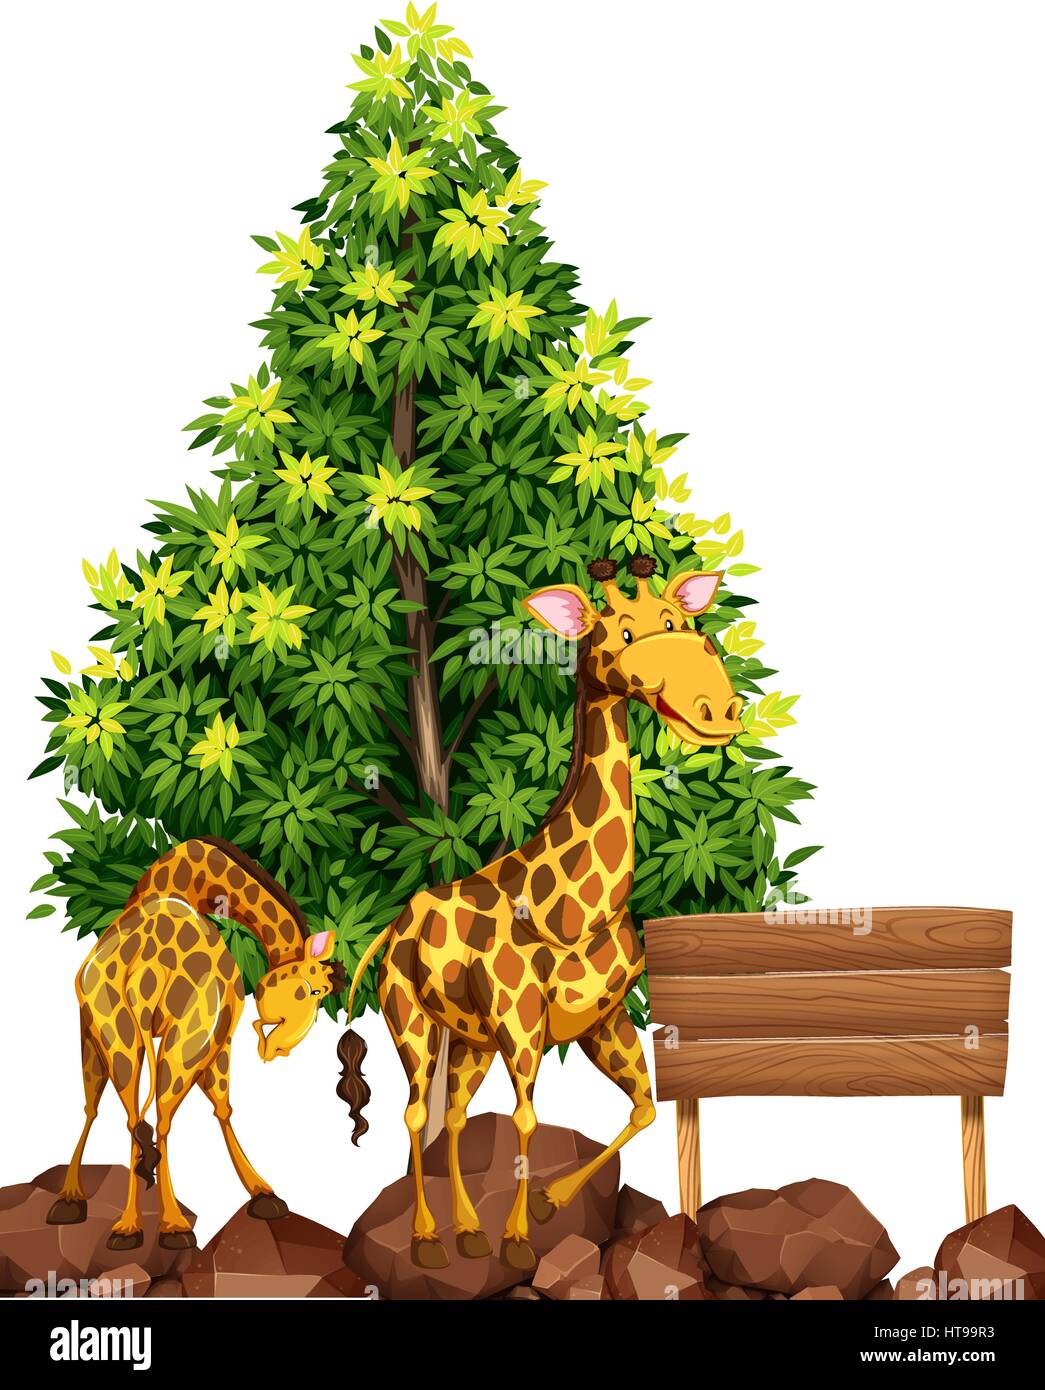 Two giraffes by the wooden sign illustration Stock Vector